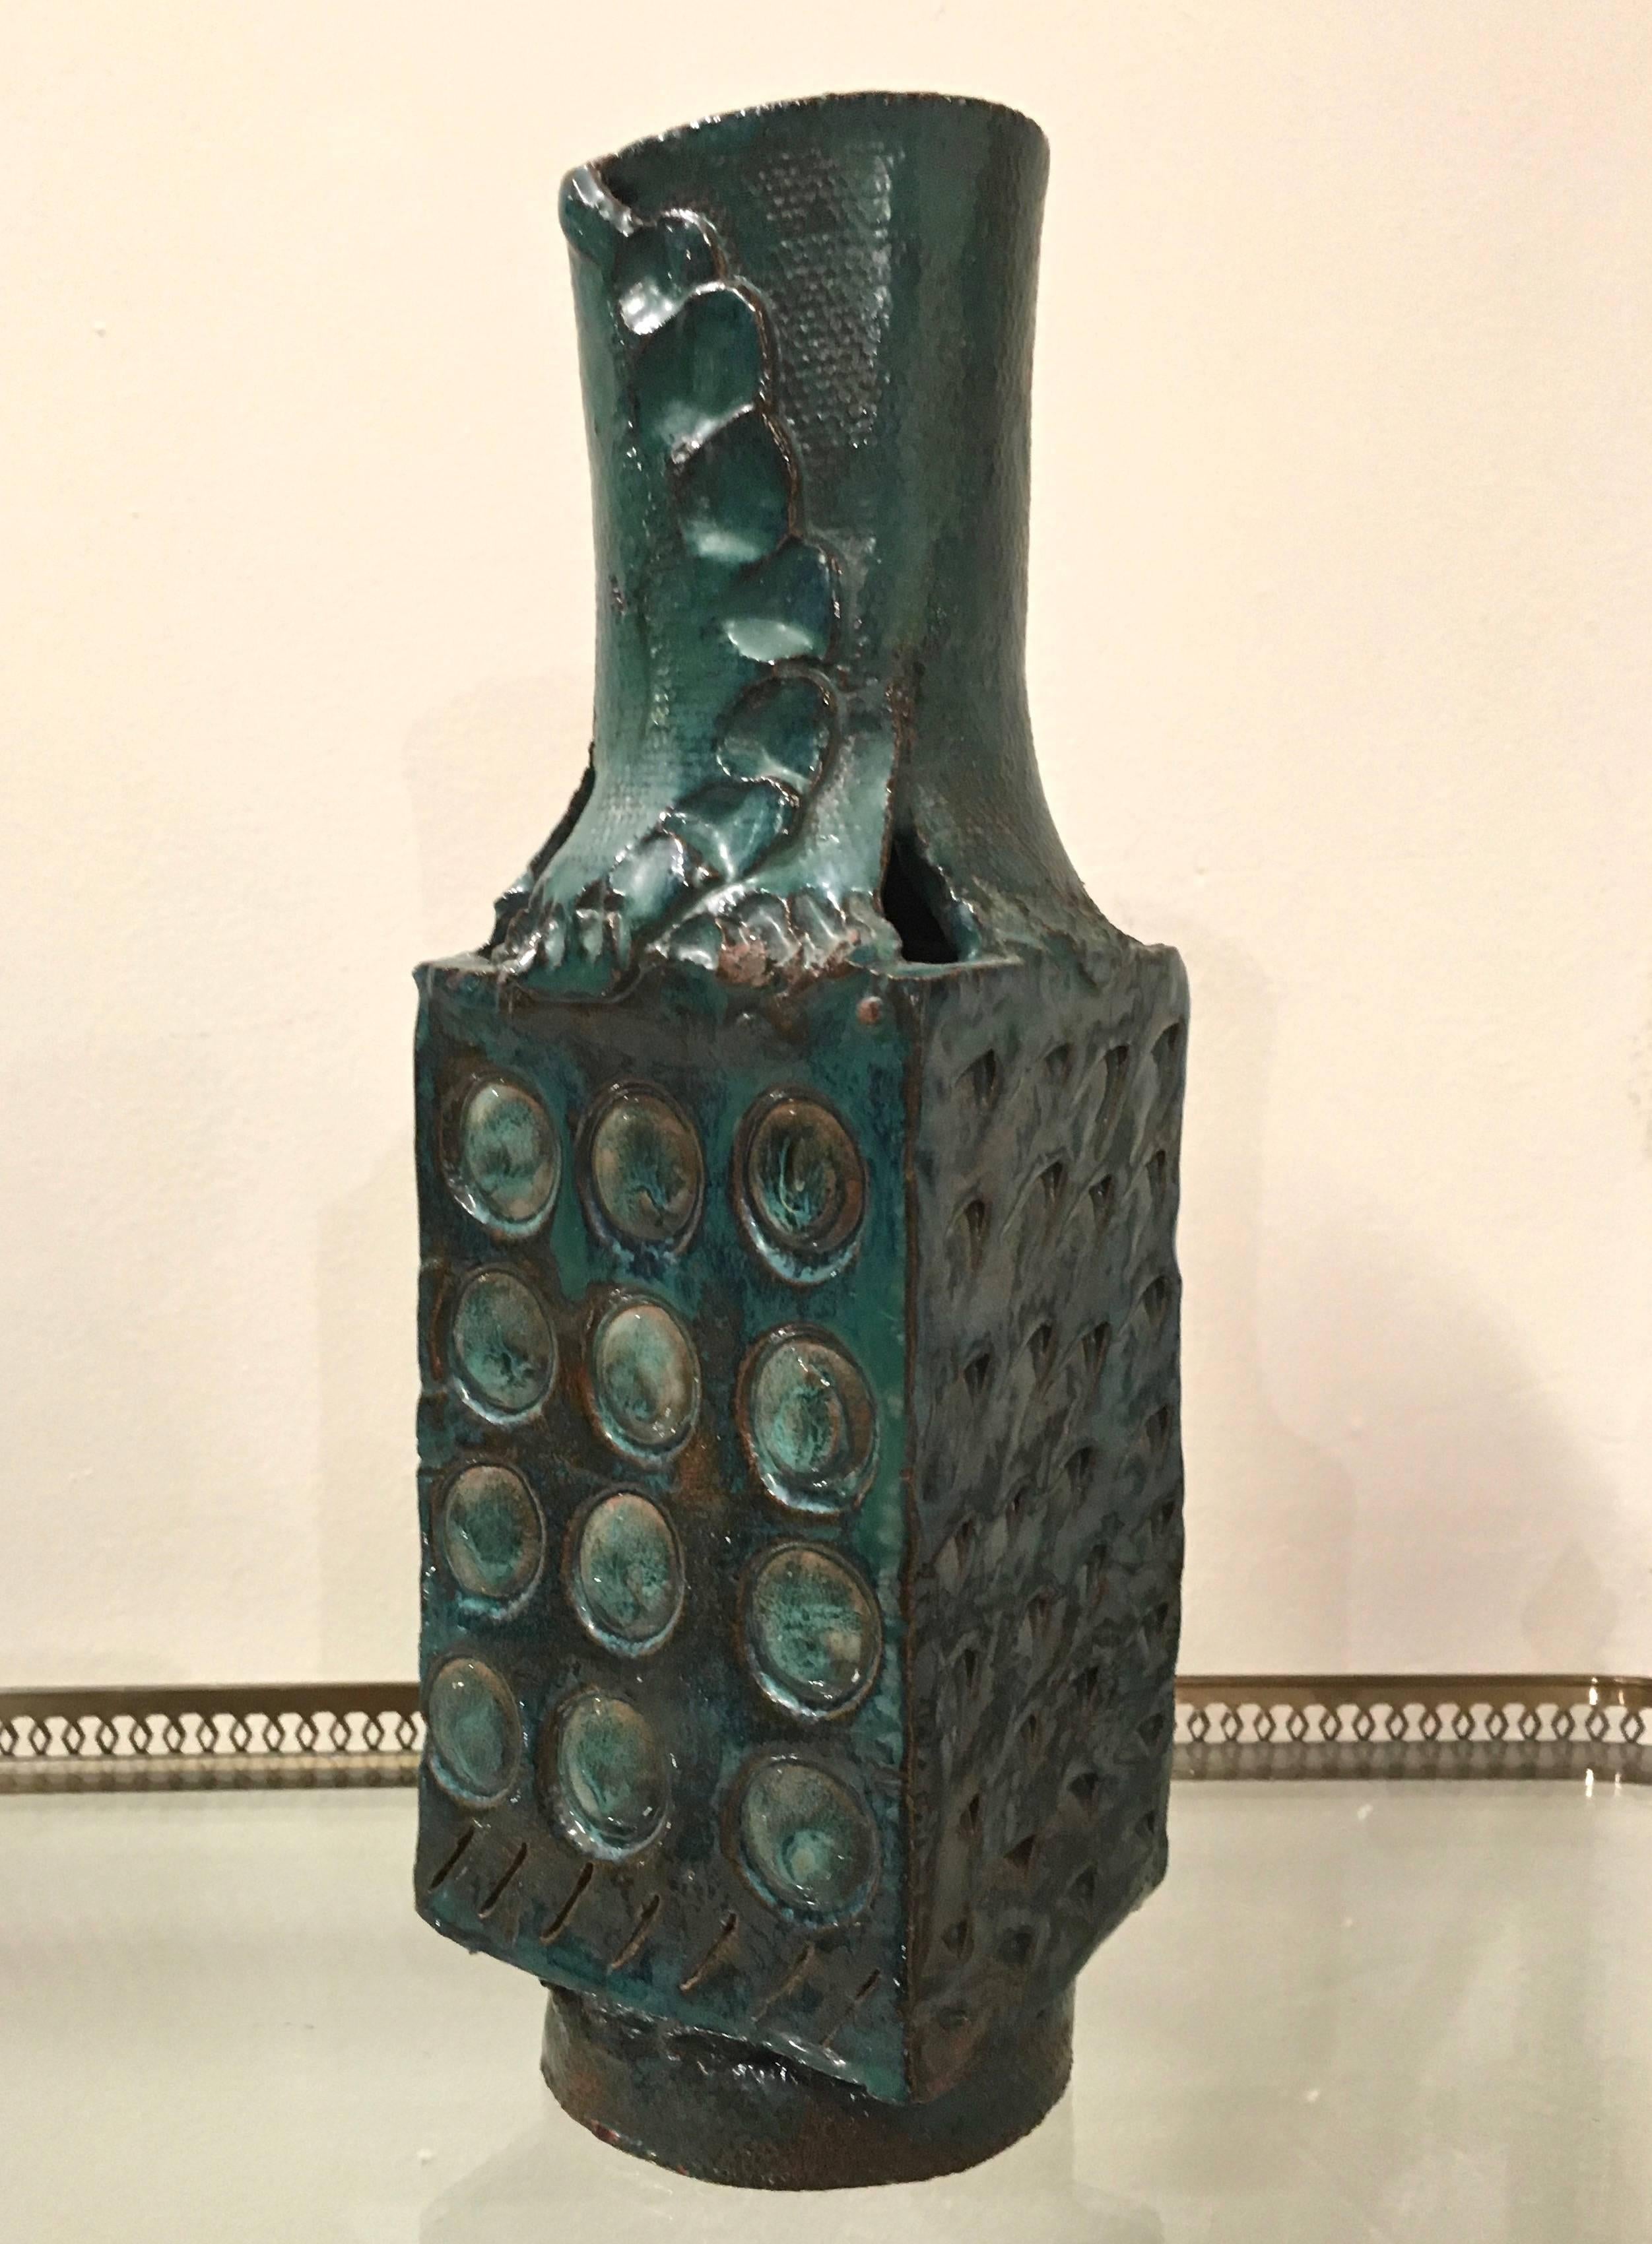 Amazing vintage modern, handcrafted pottery sculpture. This piece has a gorgeous blue green glaze, with bits of the textured terra cotta clay color peaking through. The handmade nature reveals itself in the incised geometric design, textured base